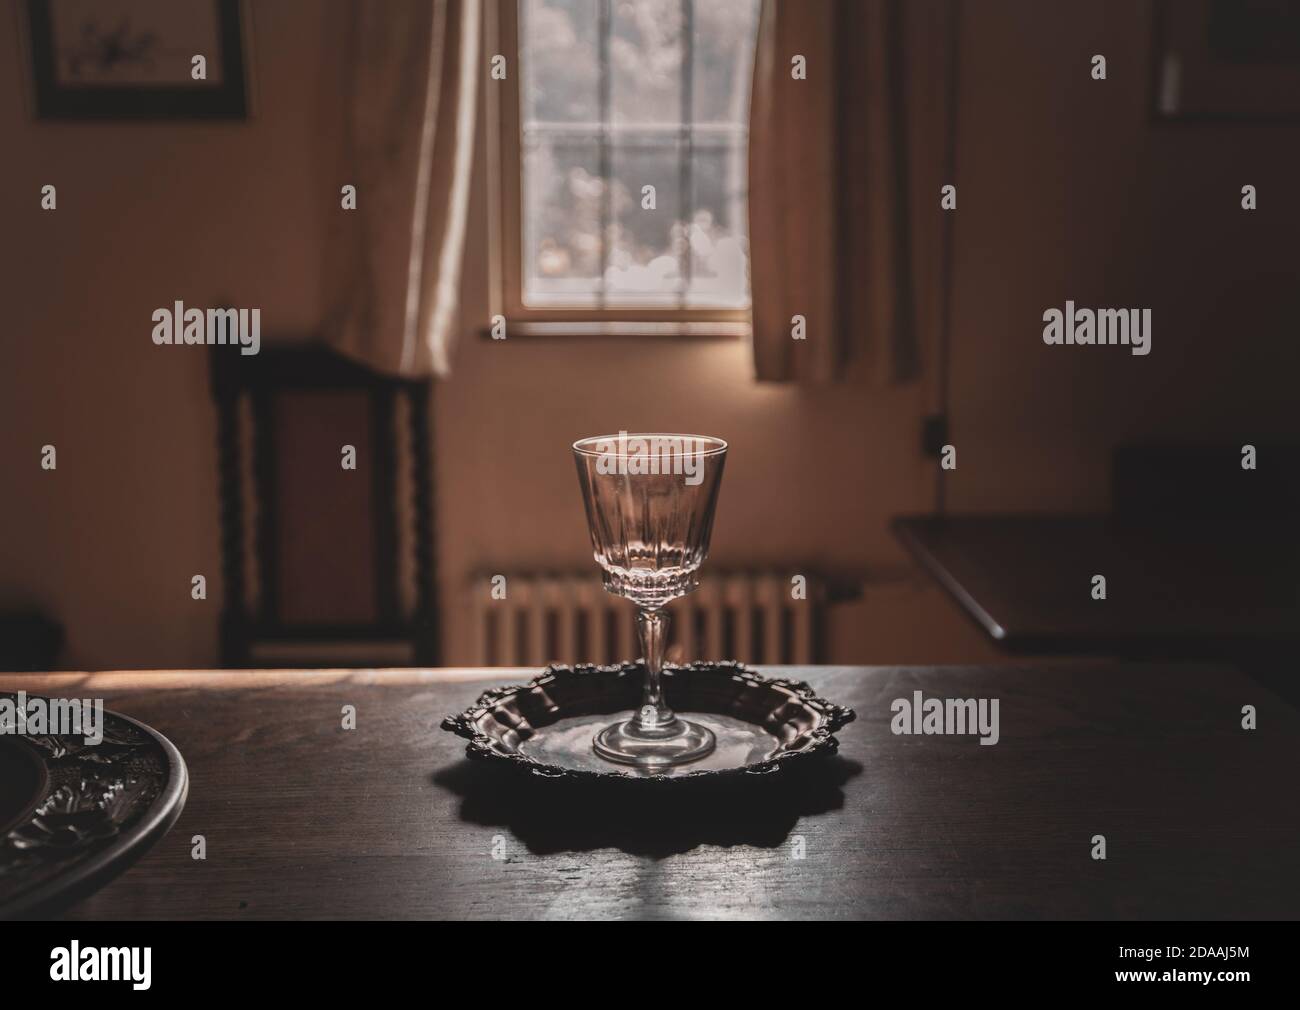 Wine glass on a silver platter in a house interior Stock Photo